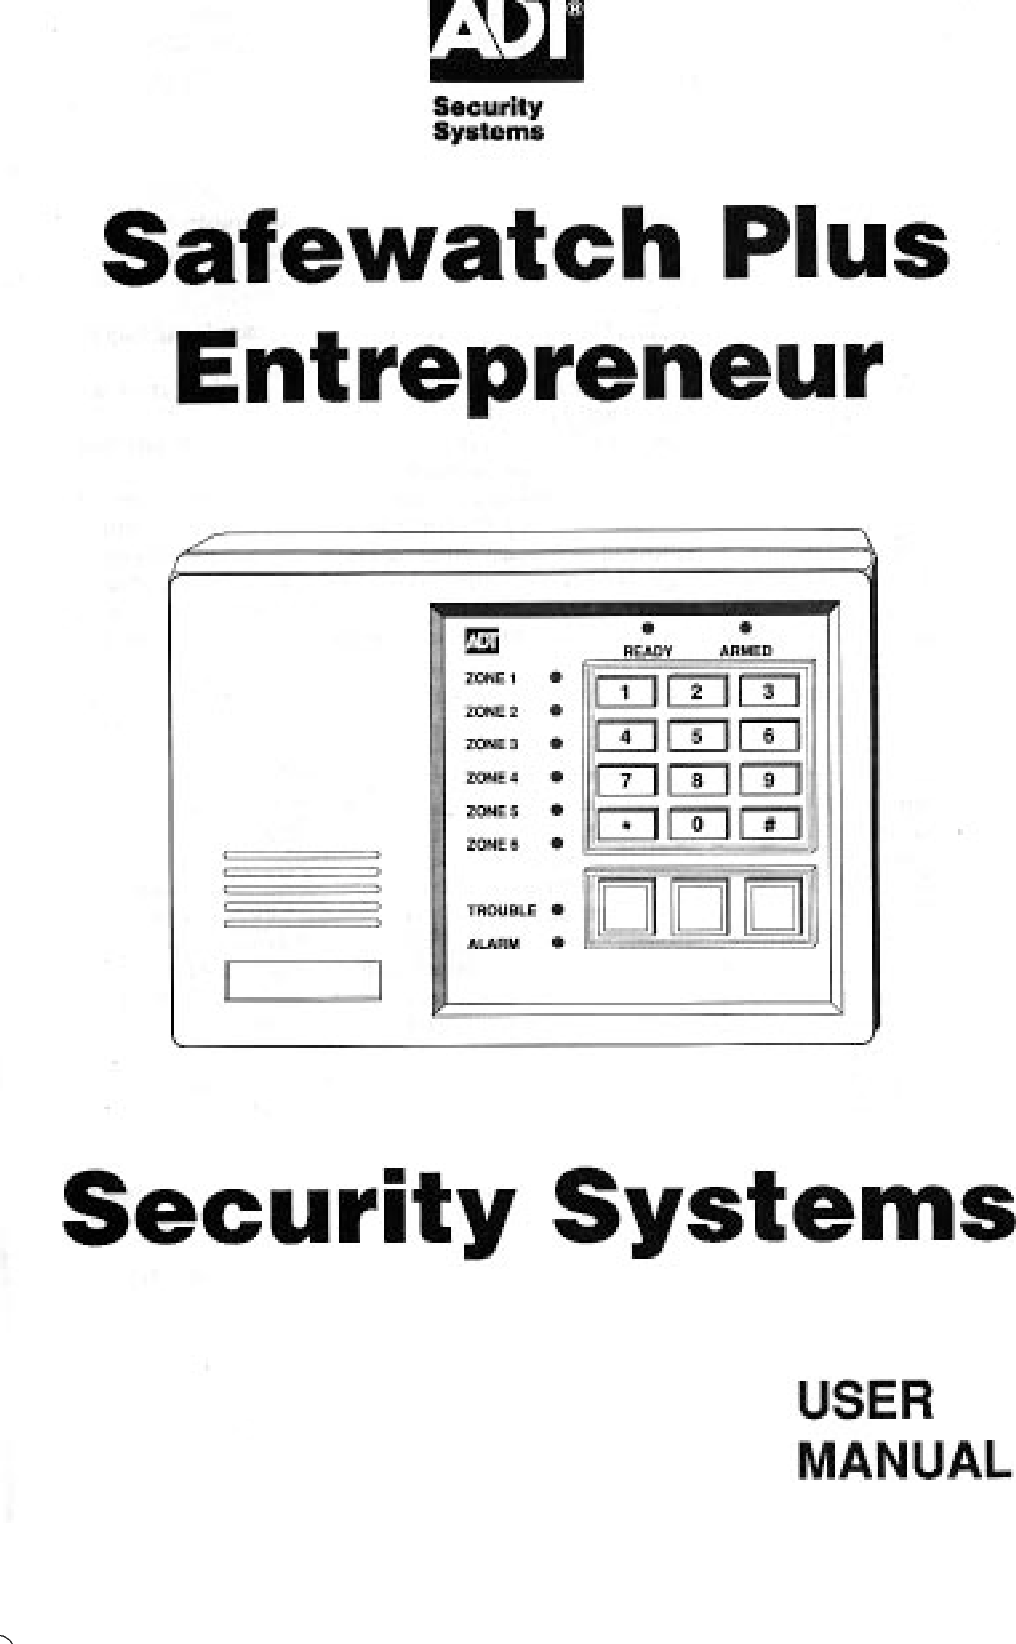 Page 1 of 1 - Adt-Security-Services Adt-Security-Services-Safewatch-Plus-Enterpreneur-Security-Systems-Users-Manual-  Adt-security-services-safewatch-plus-enterpreneur-security-systems-users-manual